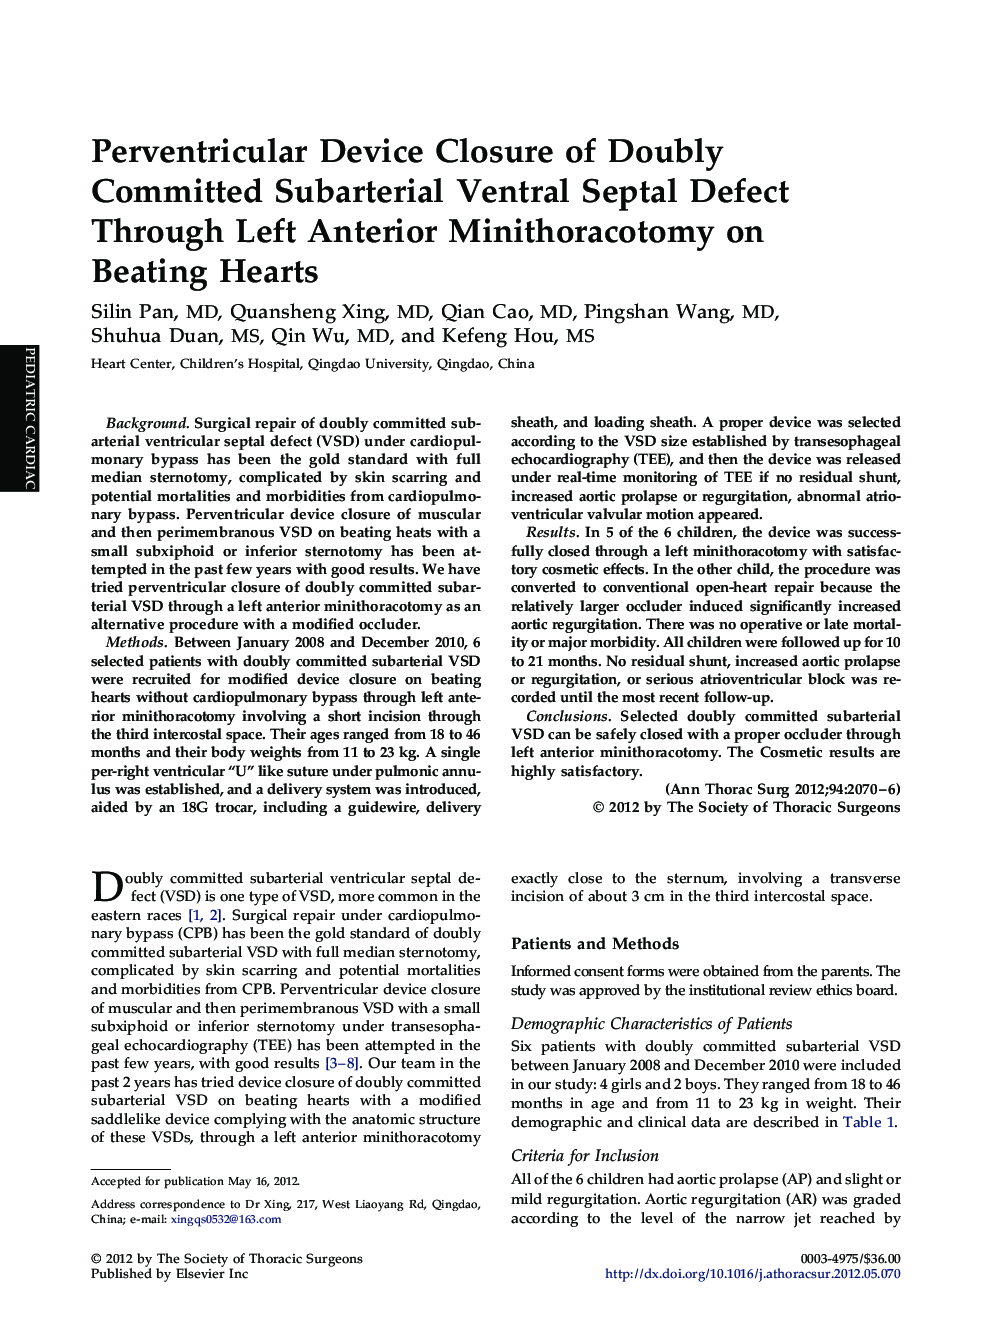 Perventricular Device Closure of Doubly Committed Subarterial Ventral Septal Defect Through Left Anterior Minithoracotomy on Beating Hearts